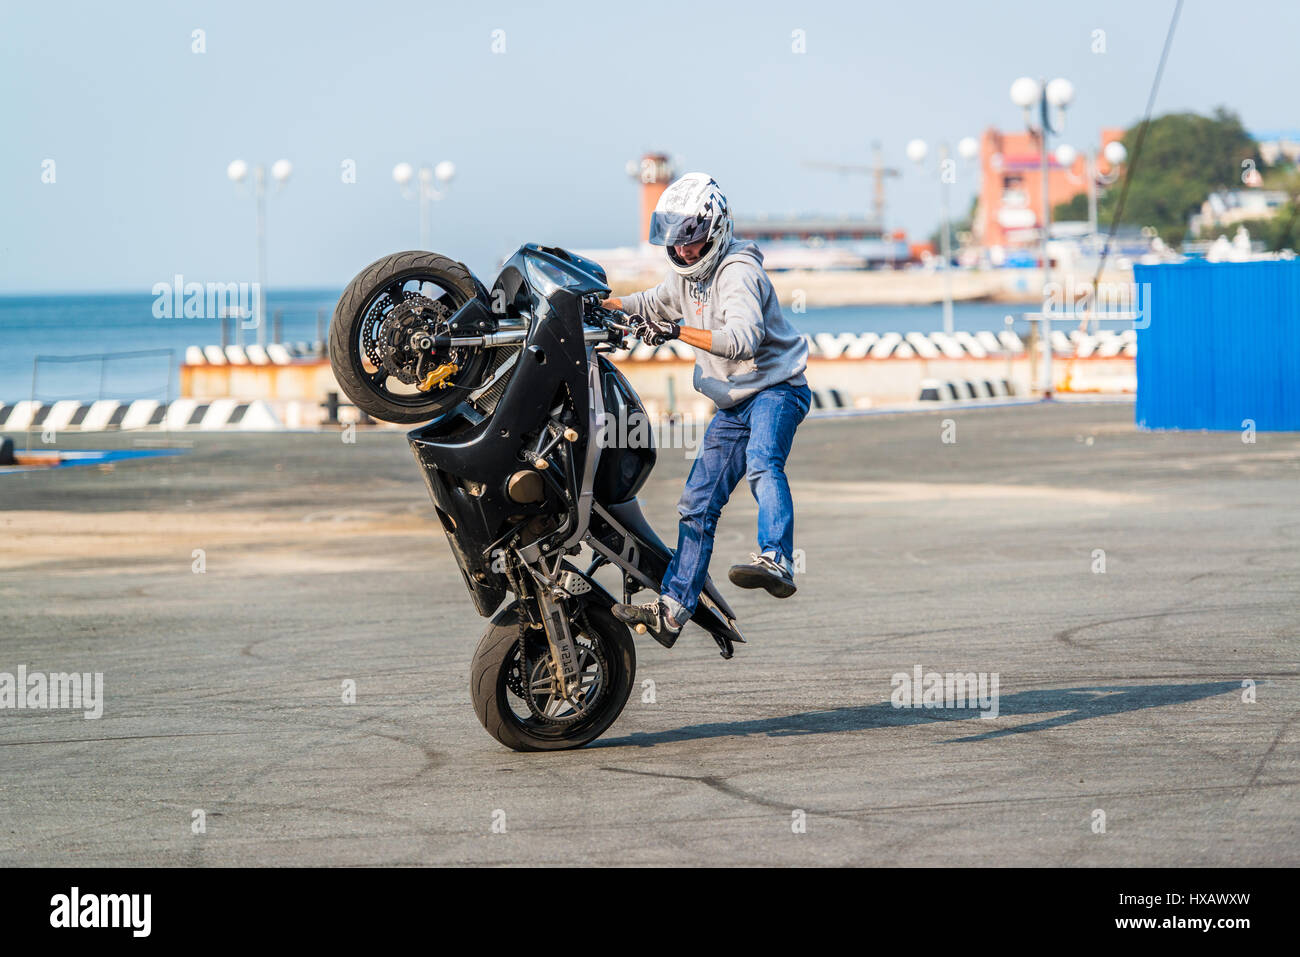 VLADIVOSTOK, RUSSIA - October 05, 2013: Stunt motorcycle rider performing at a local motorcycle show. Stock Photo